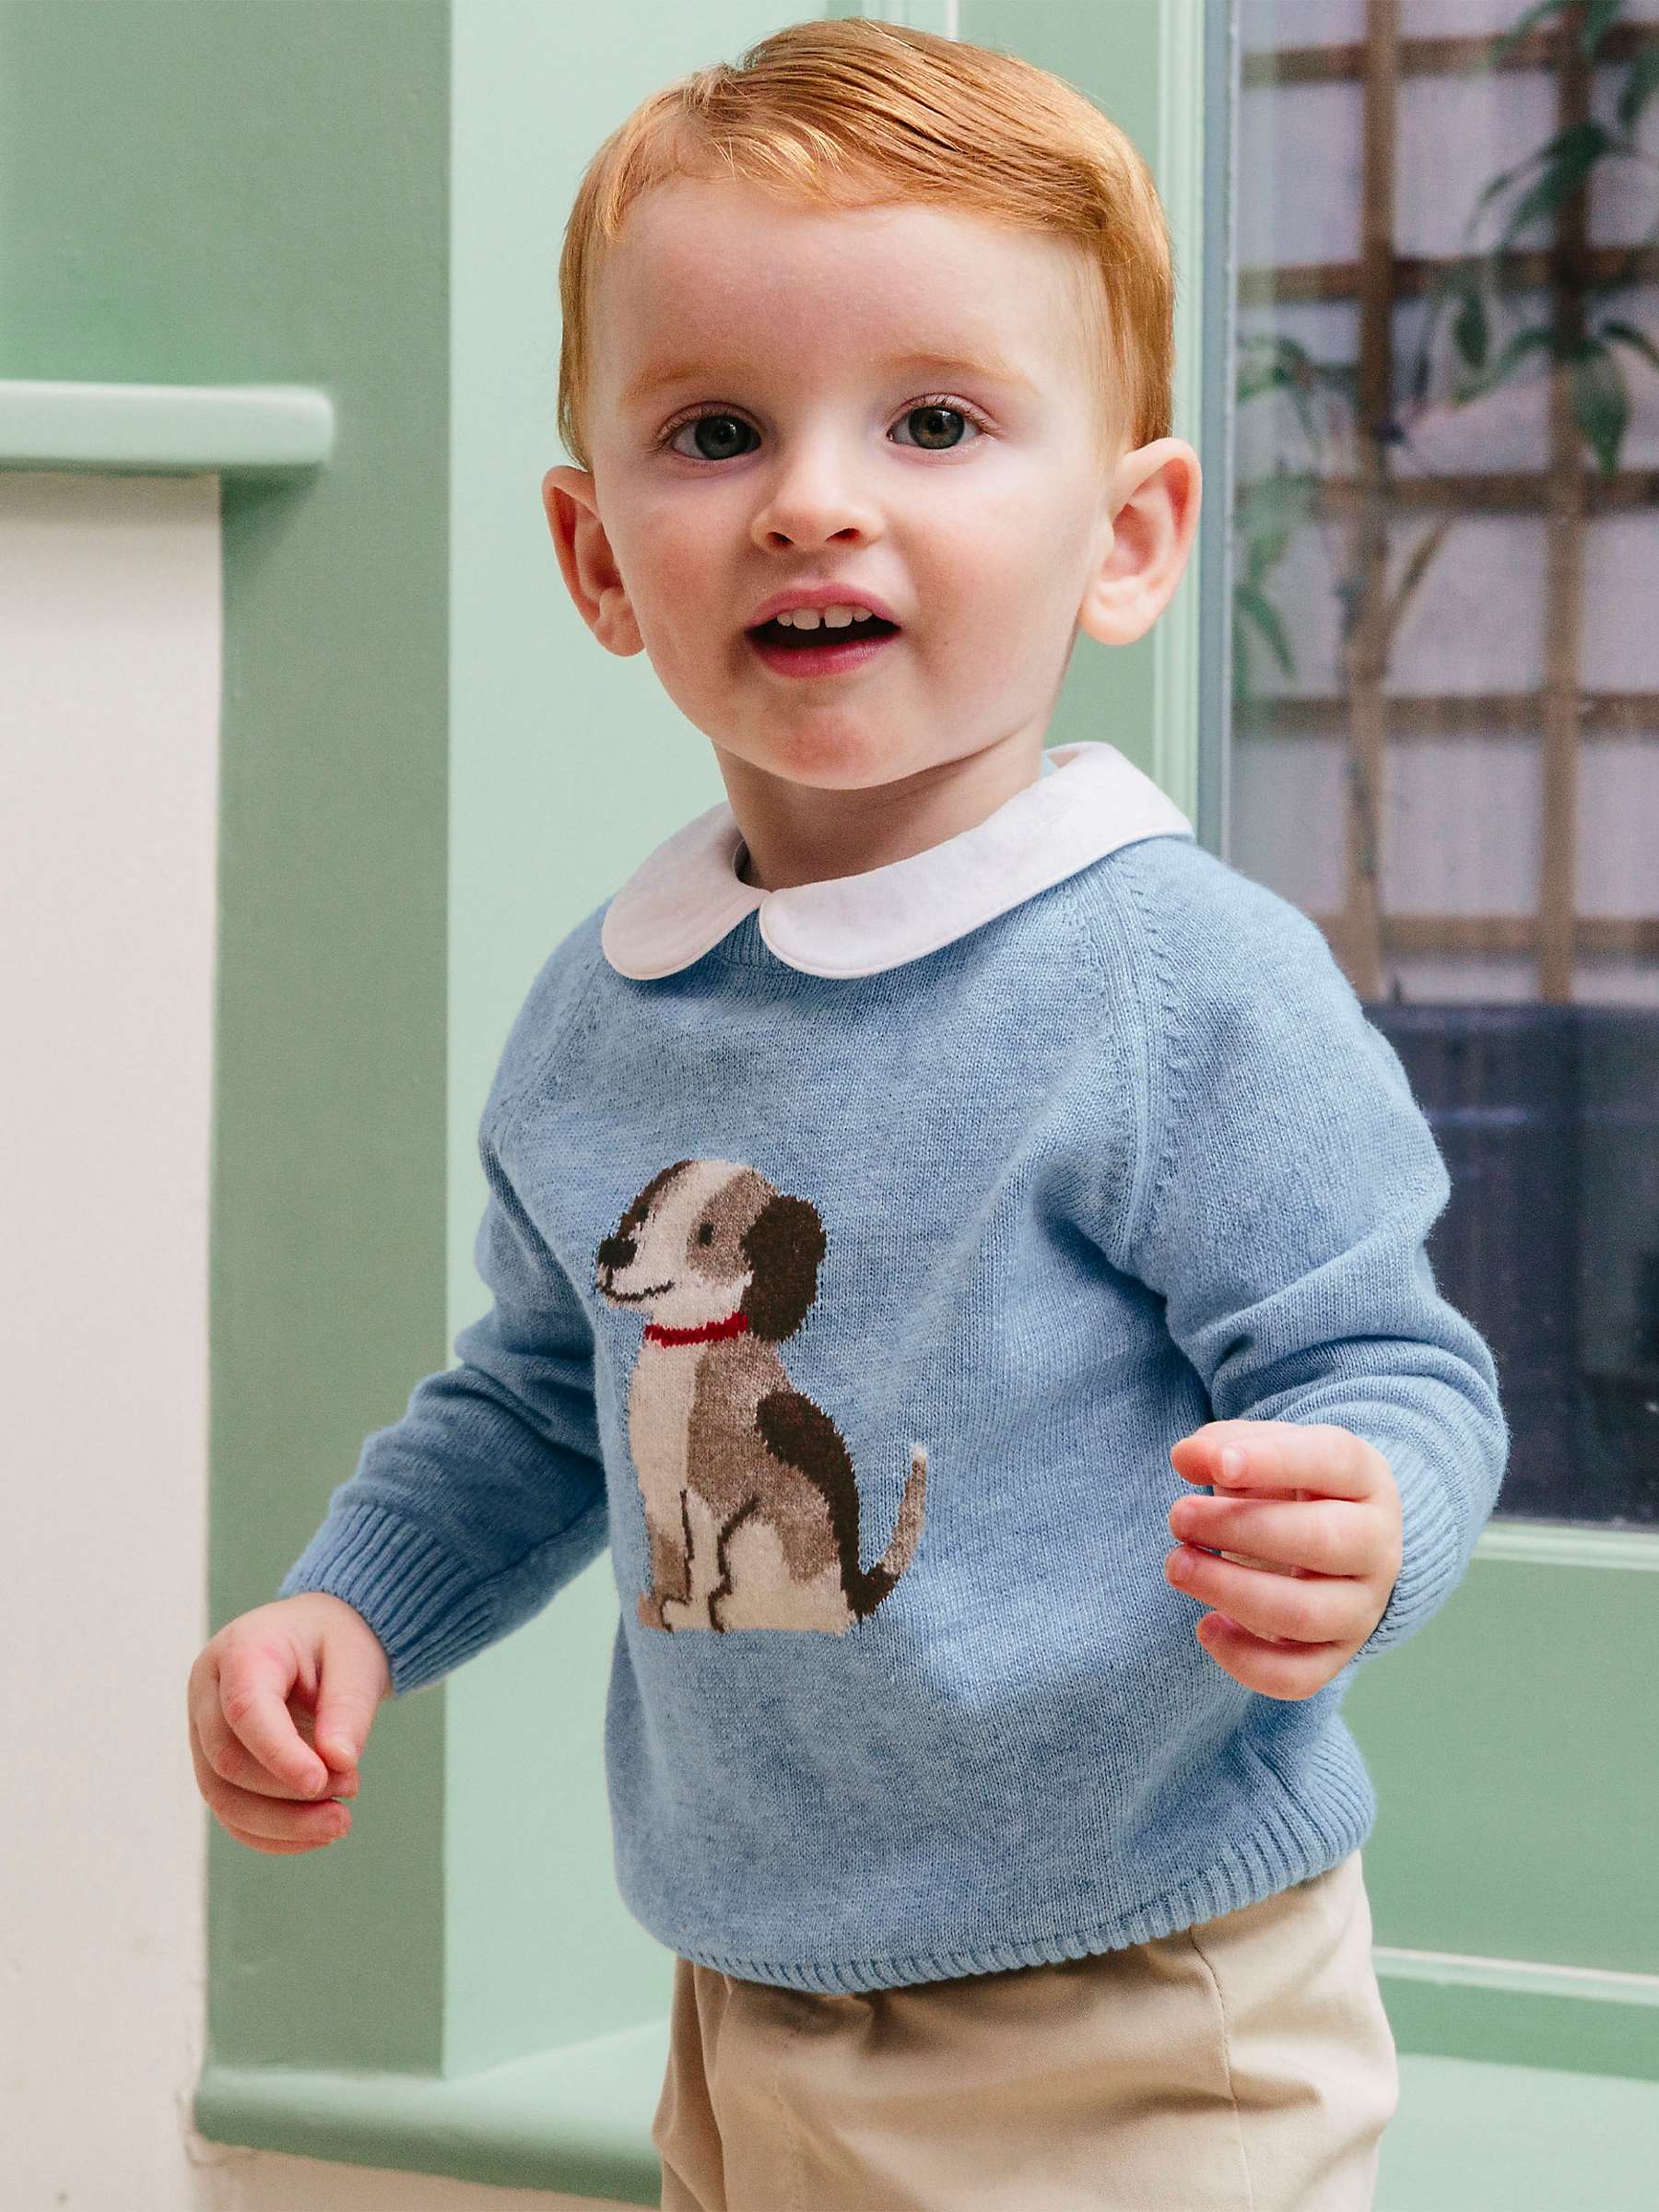 Buy Trotters Baby Puppy Intarsia Jumper, Blue Marl Online at johnlewis.com